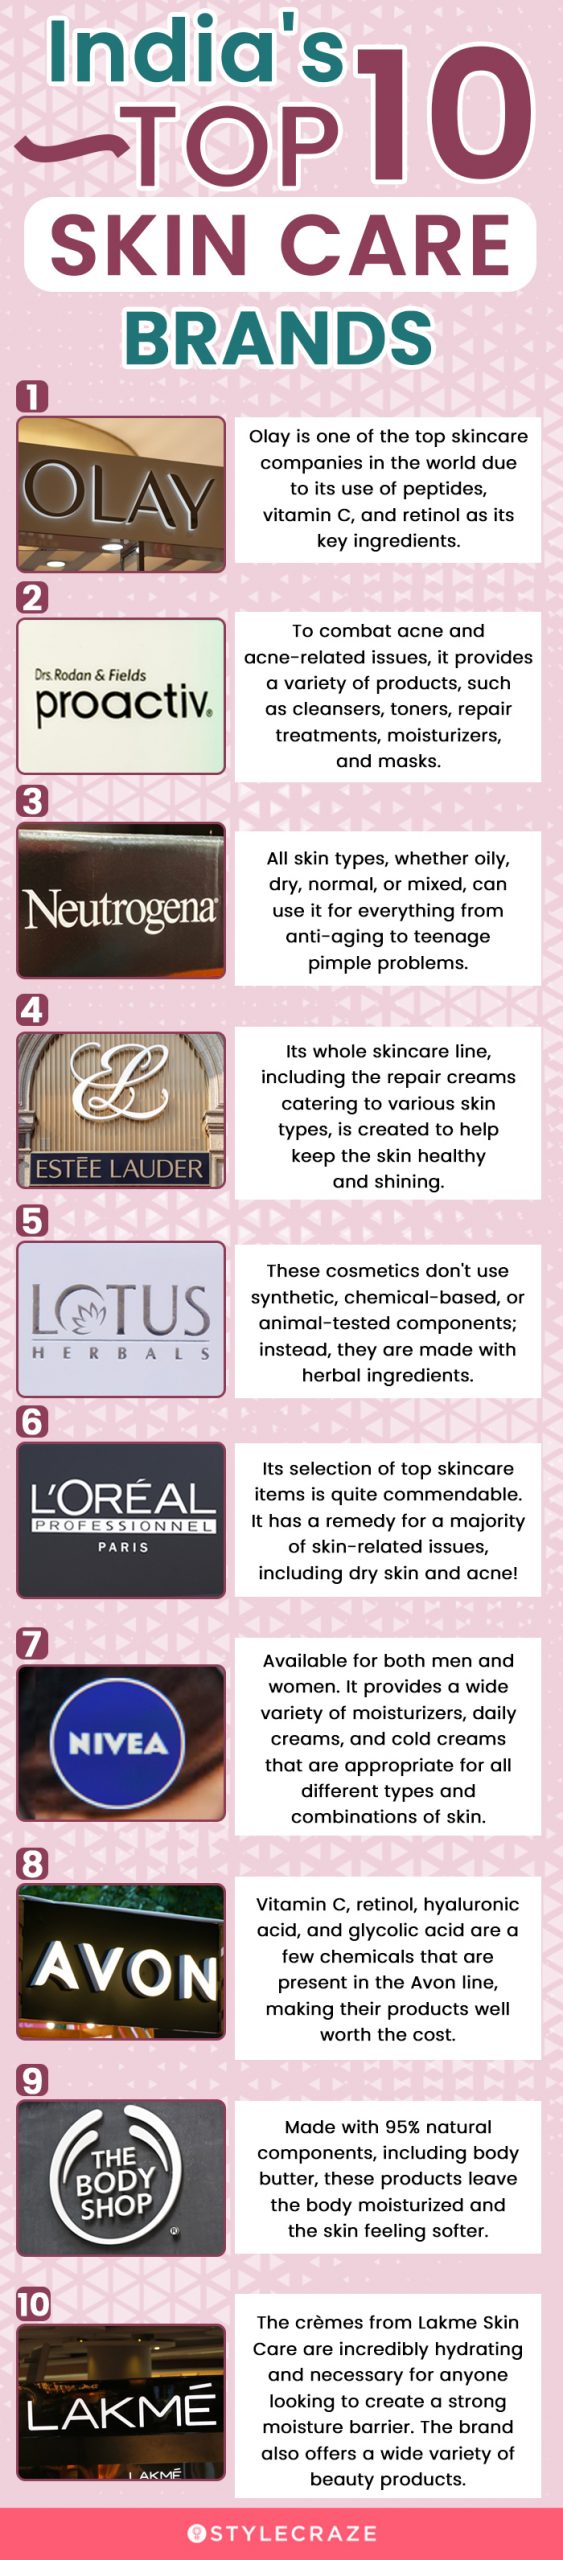 india's top 10 skin care brands (infographic)